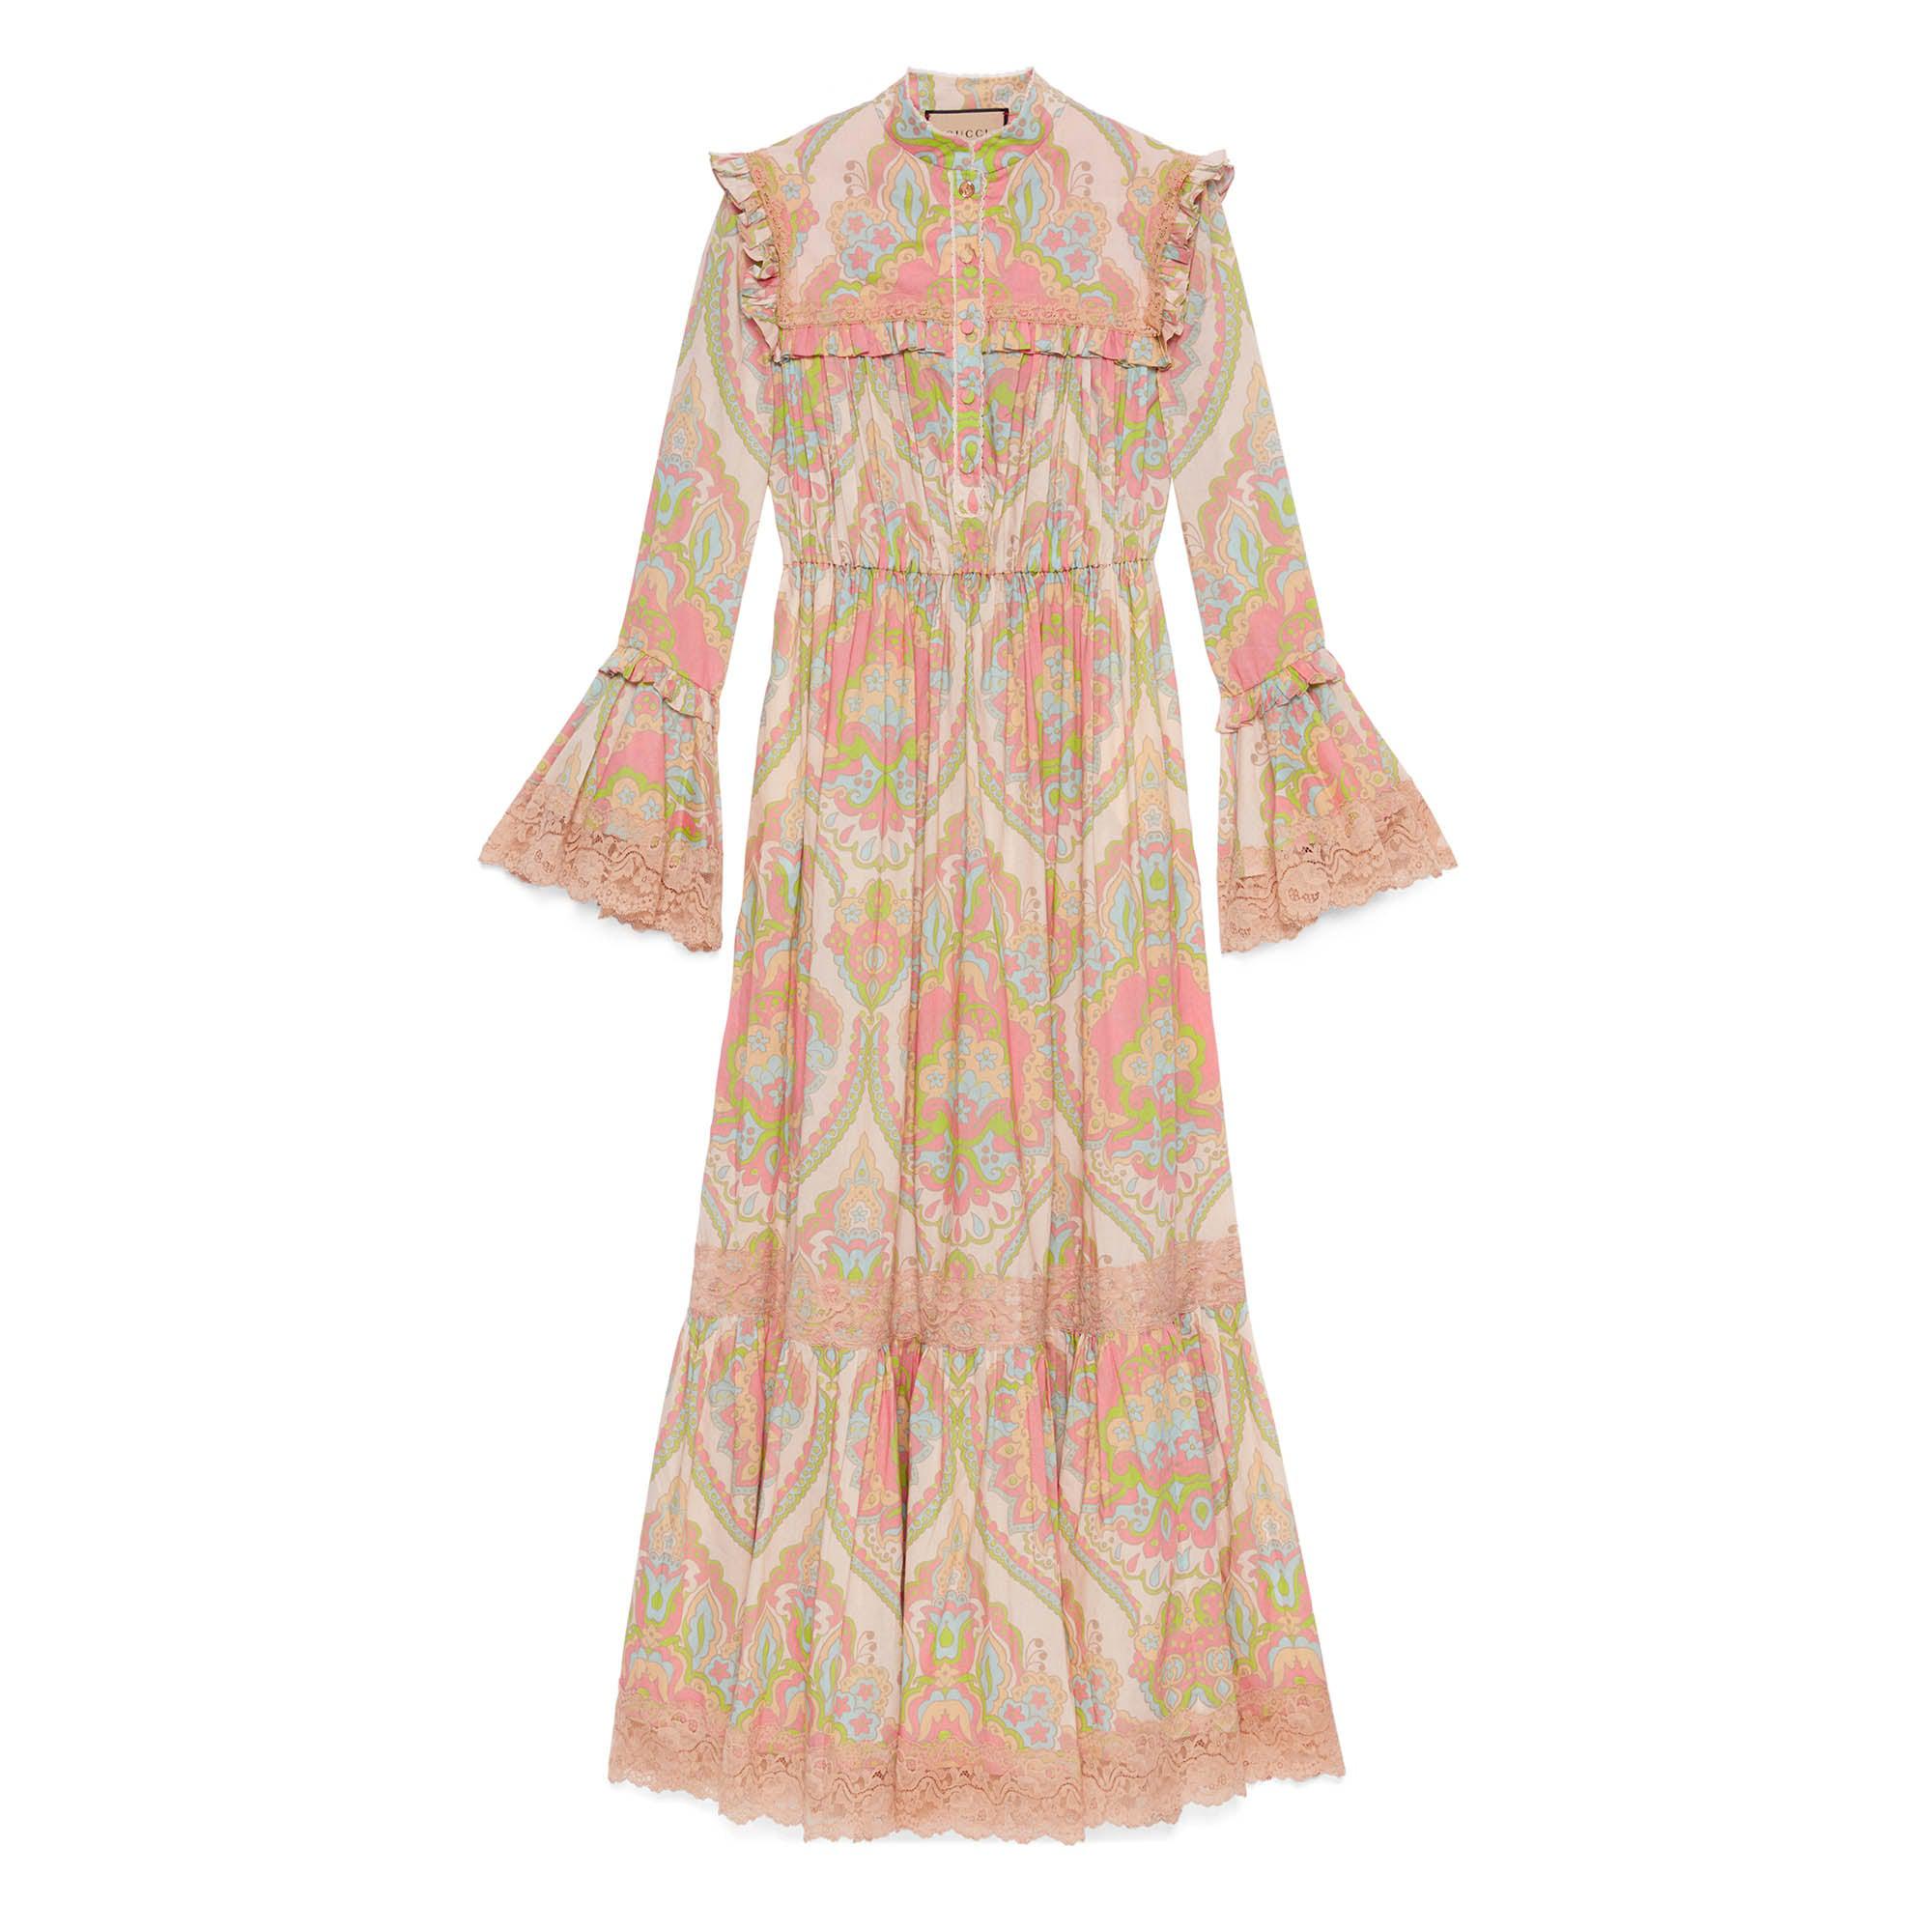 Gucci Women's Floral Print Muslin Dress (Pale Pink) by GUCCI